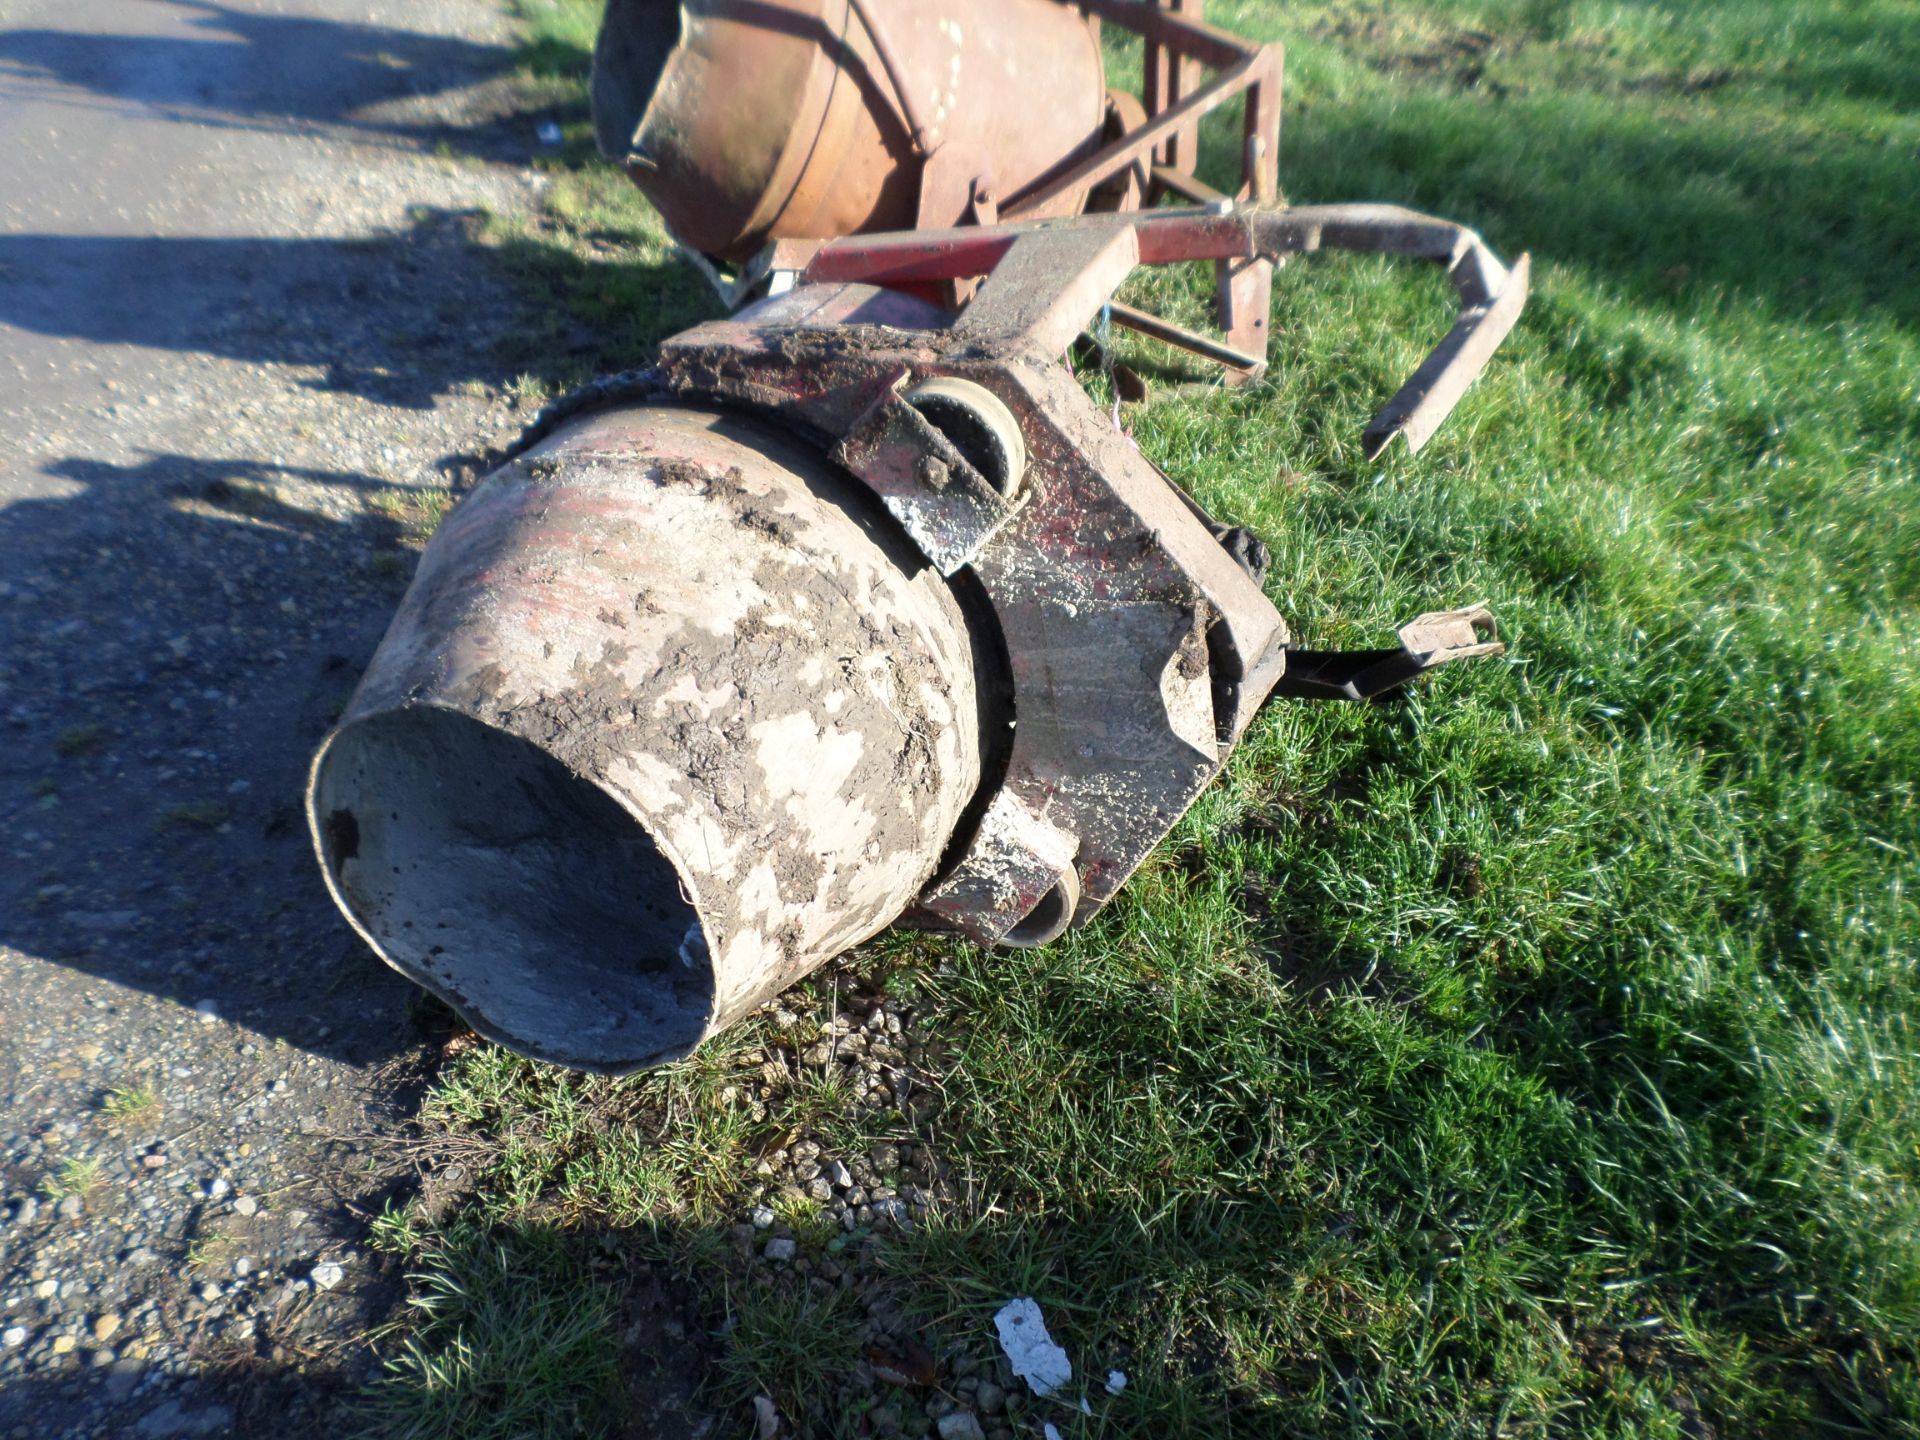 3 point linkage cement mixer - Image 3 of 3